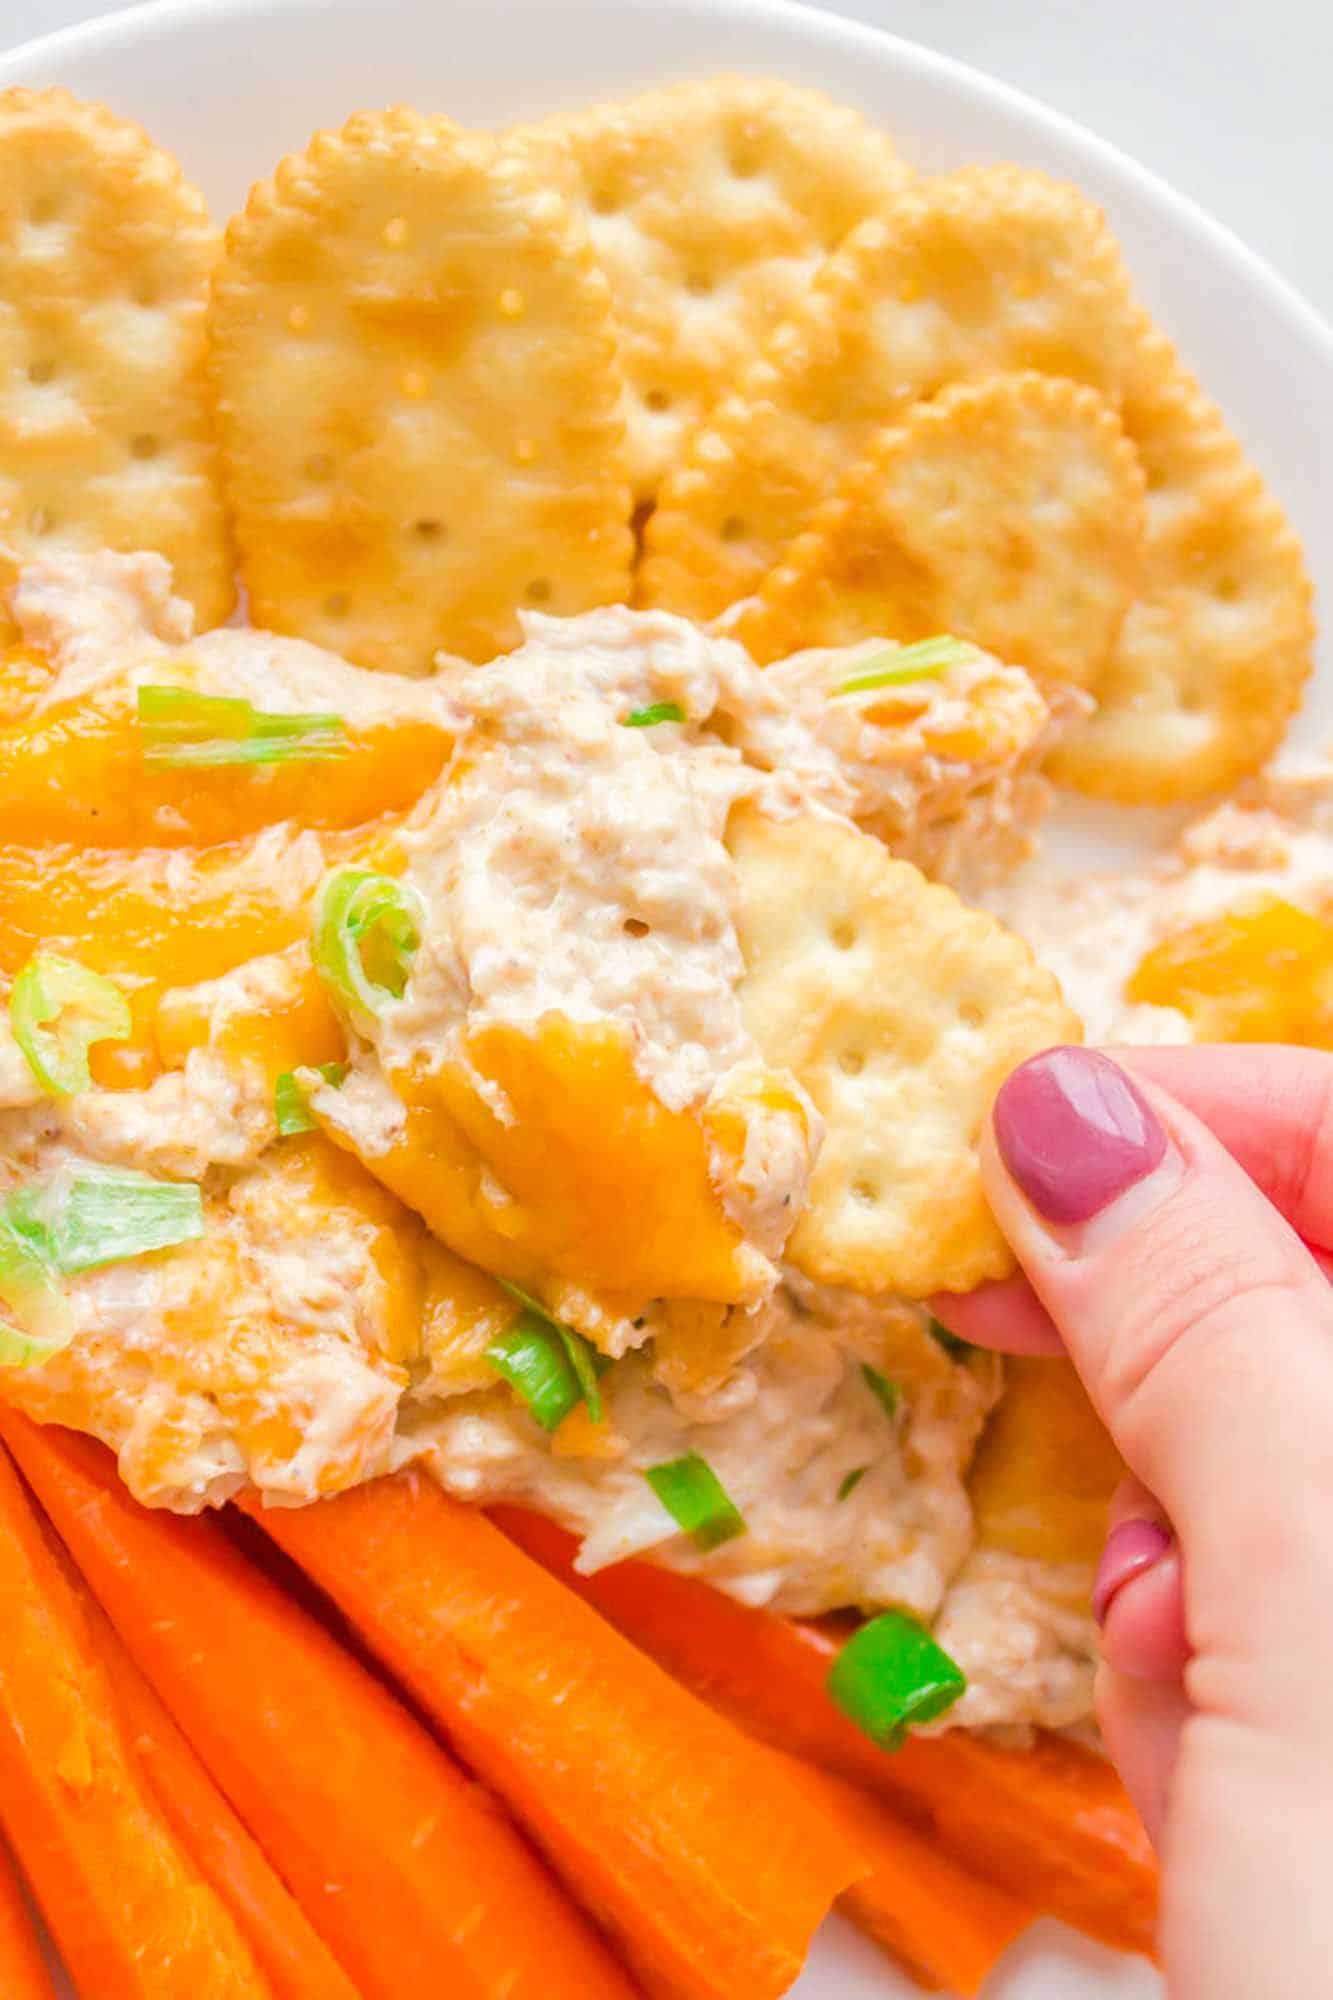 Plated crab dip with carrot sticks and crackers